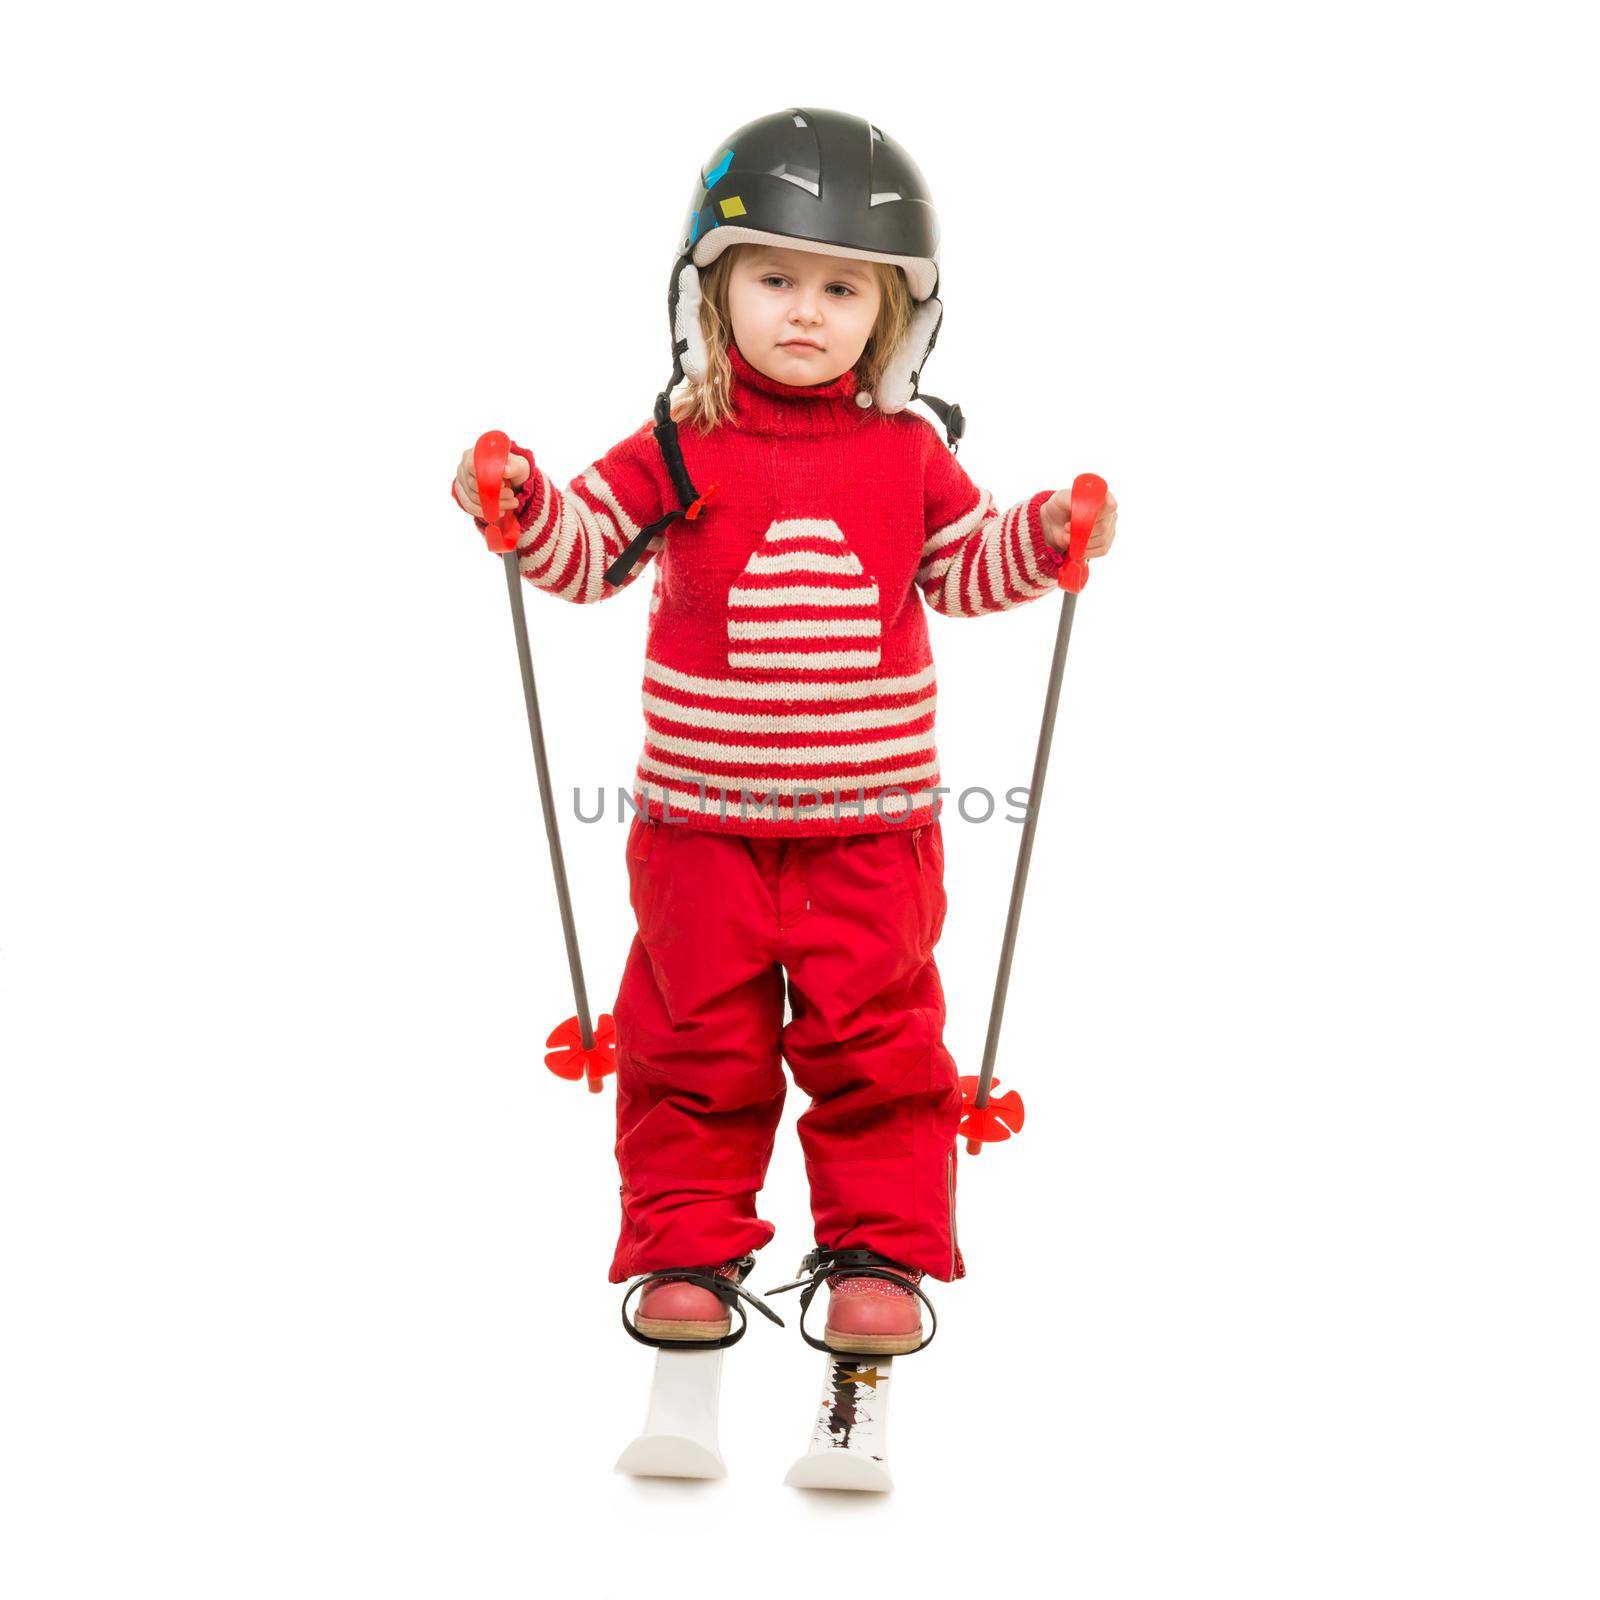 little girl in red ski suit standing on skis by tan4ikk1